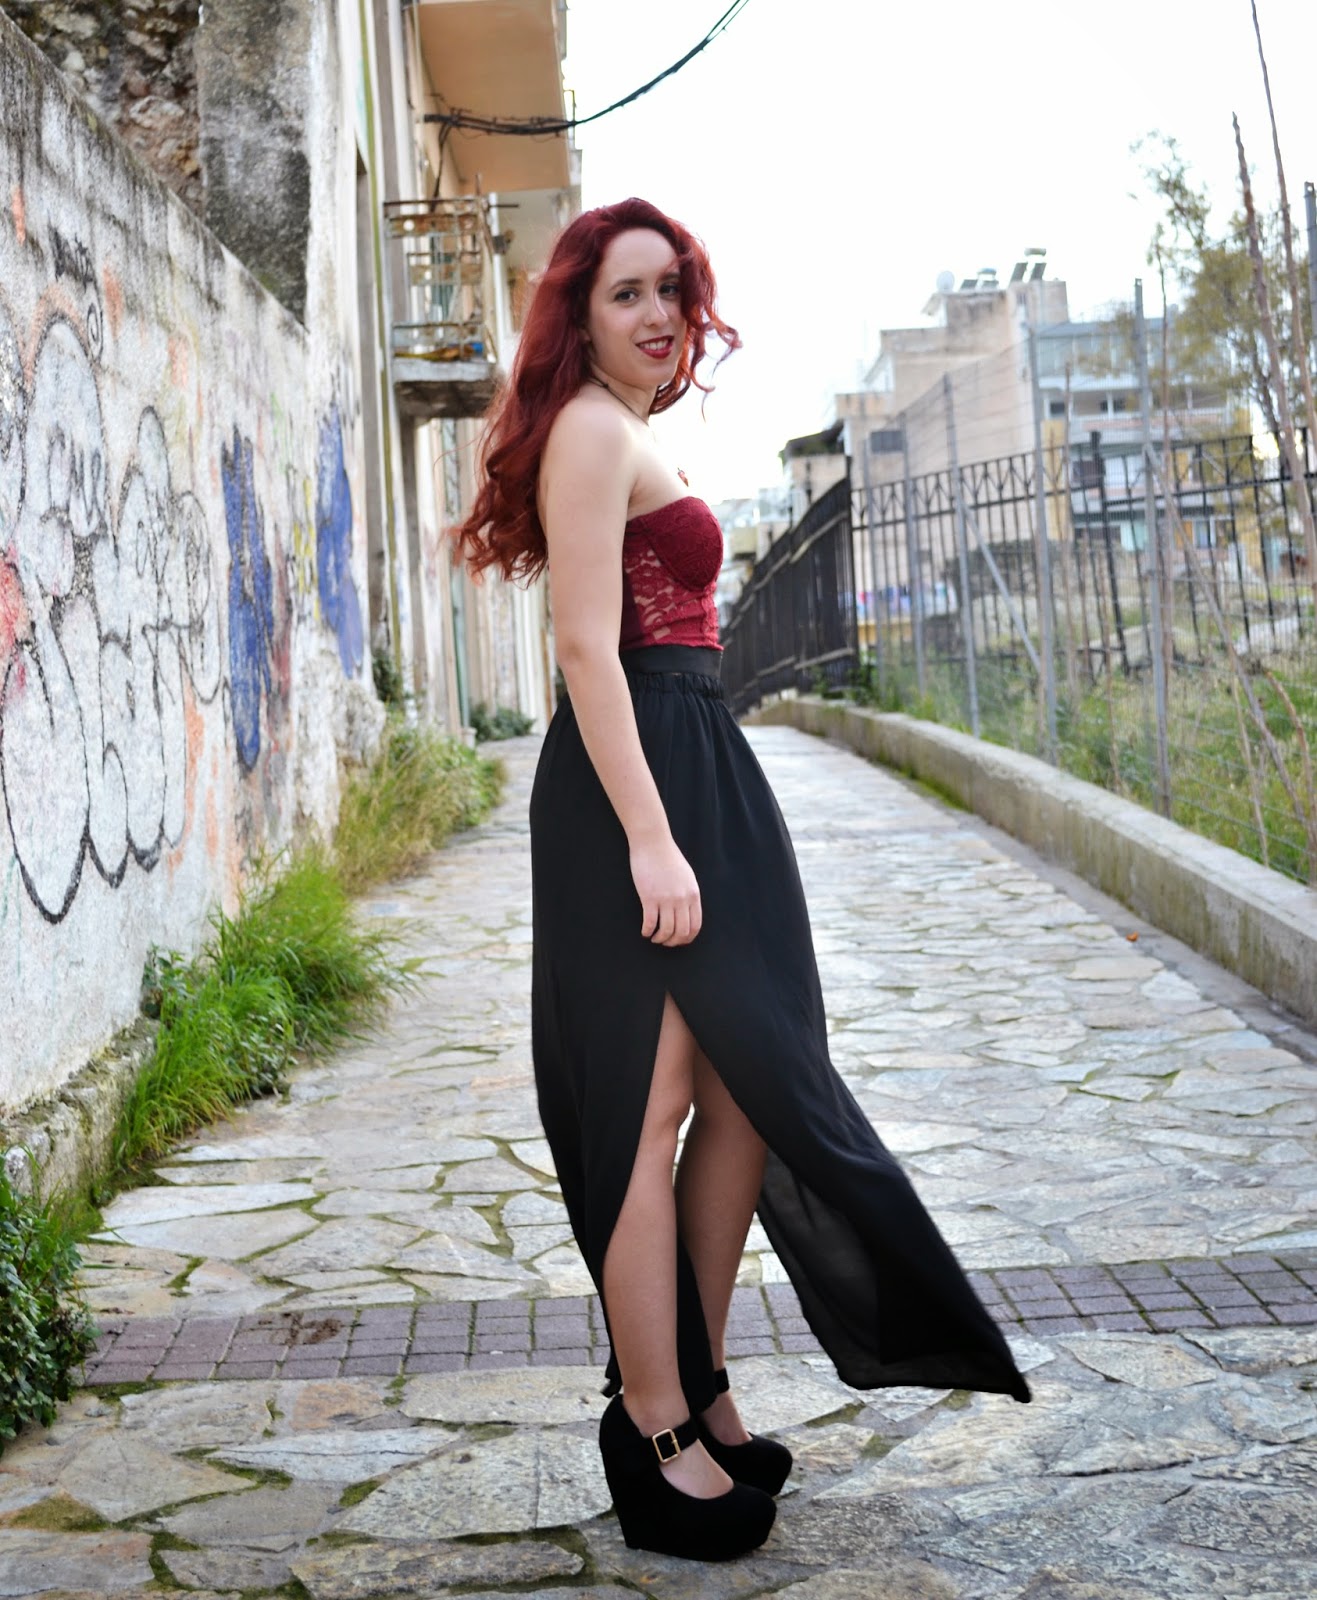 Anna ,Keni,redhead, spotlights on the redhead,fashion,model,blogger, BSB, migato, clothes, outfit, valentine's day,night,